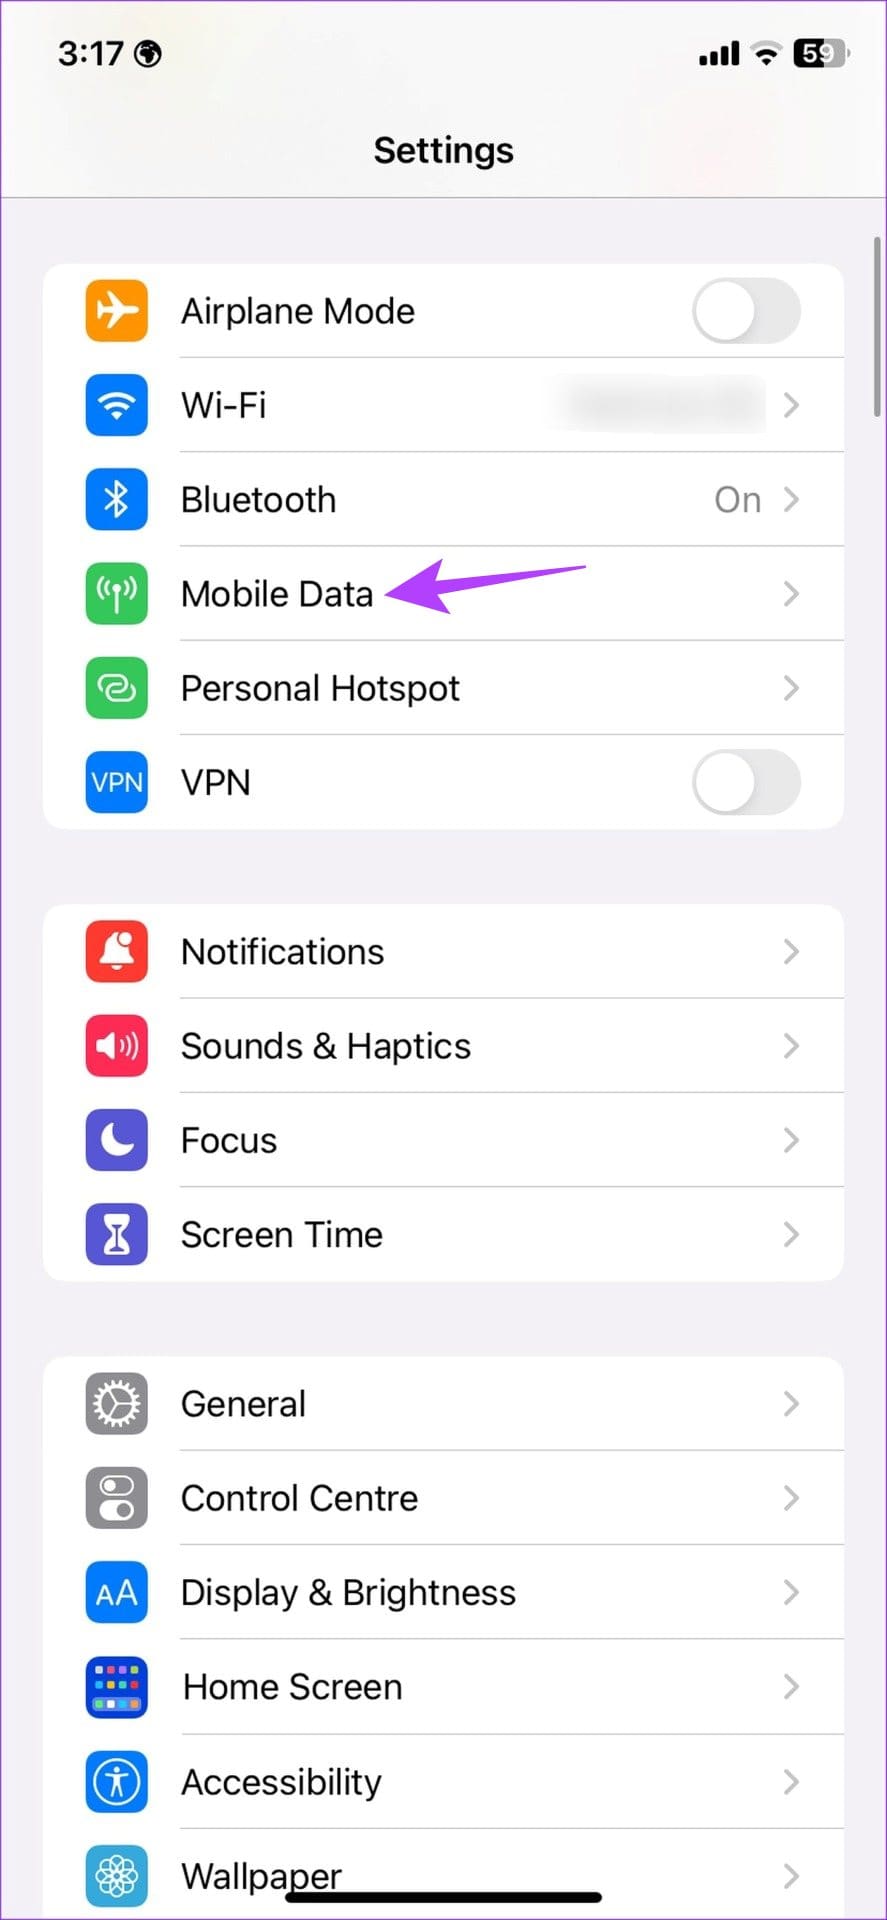 Tap on Mobile Data